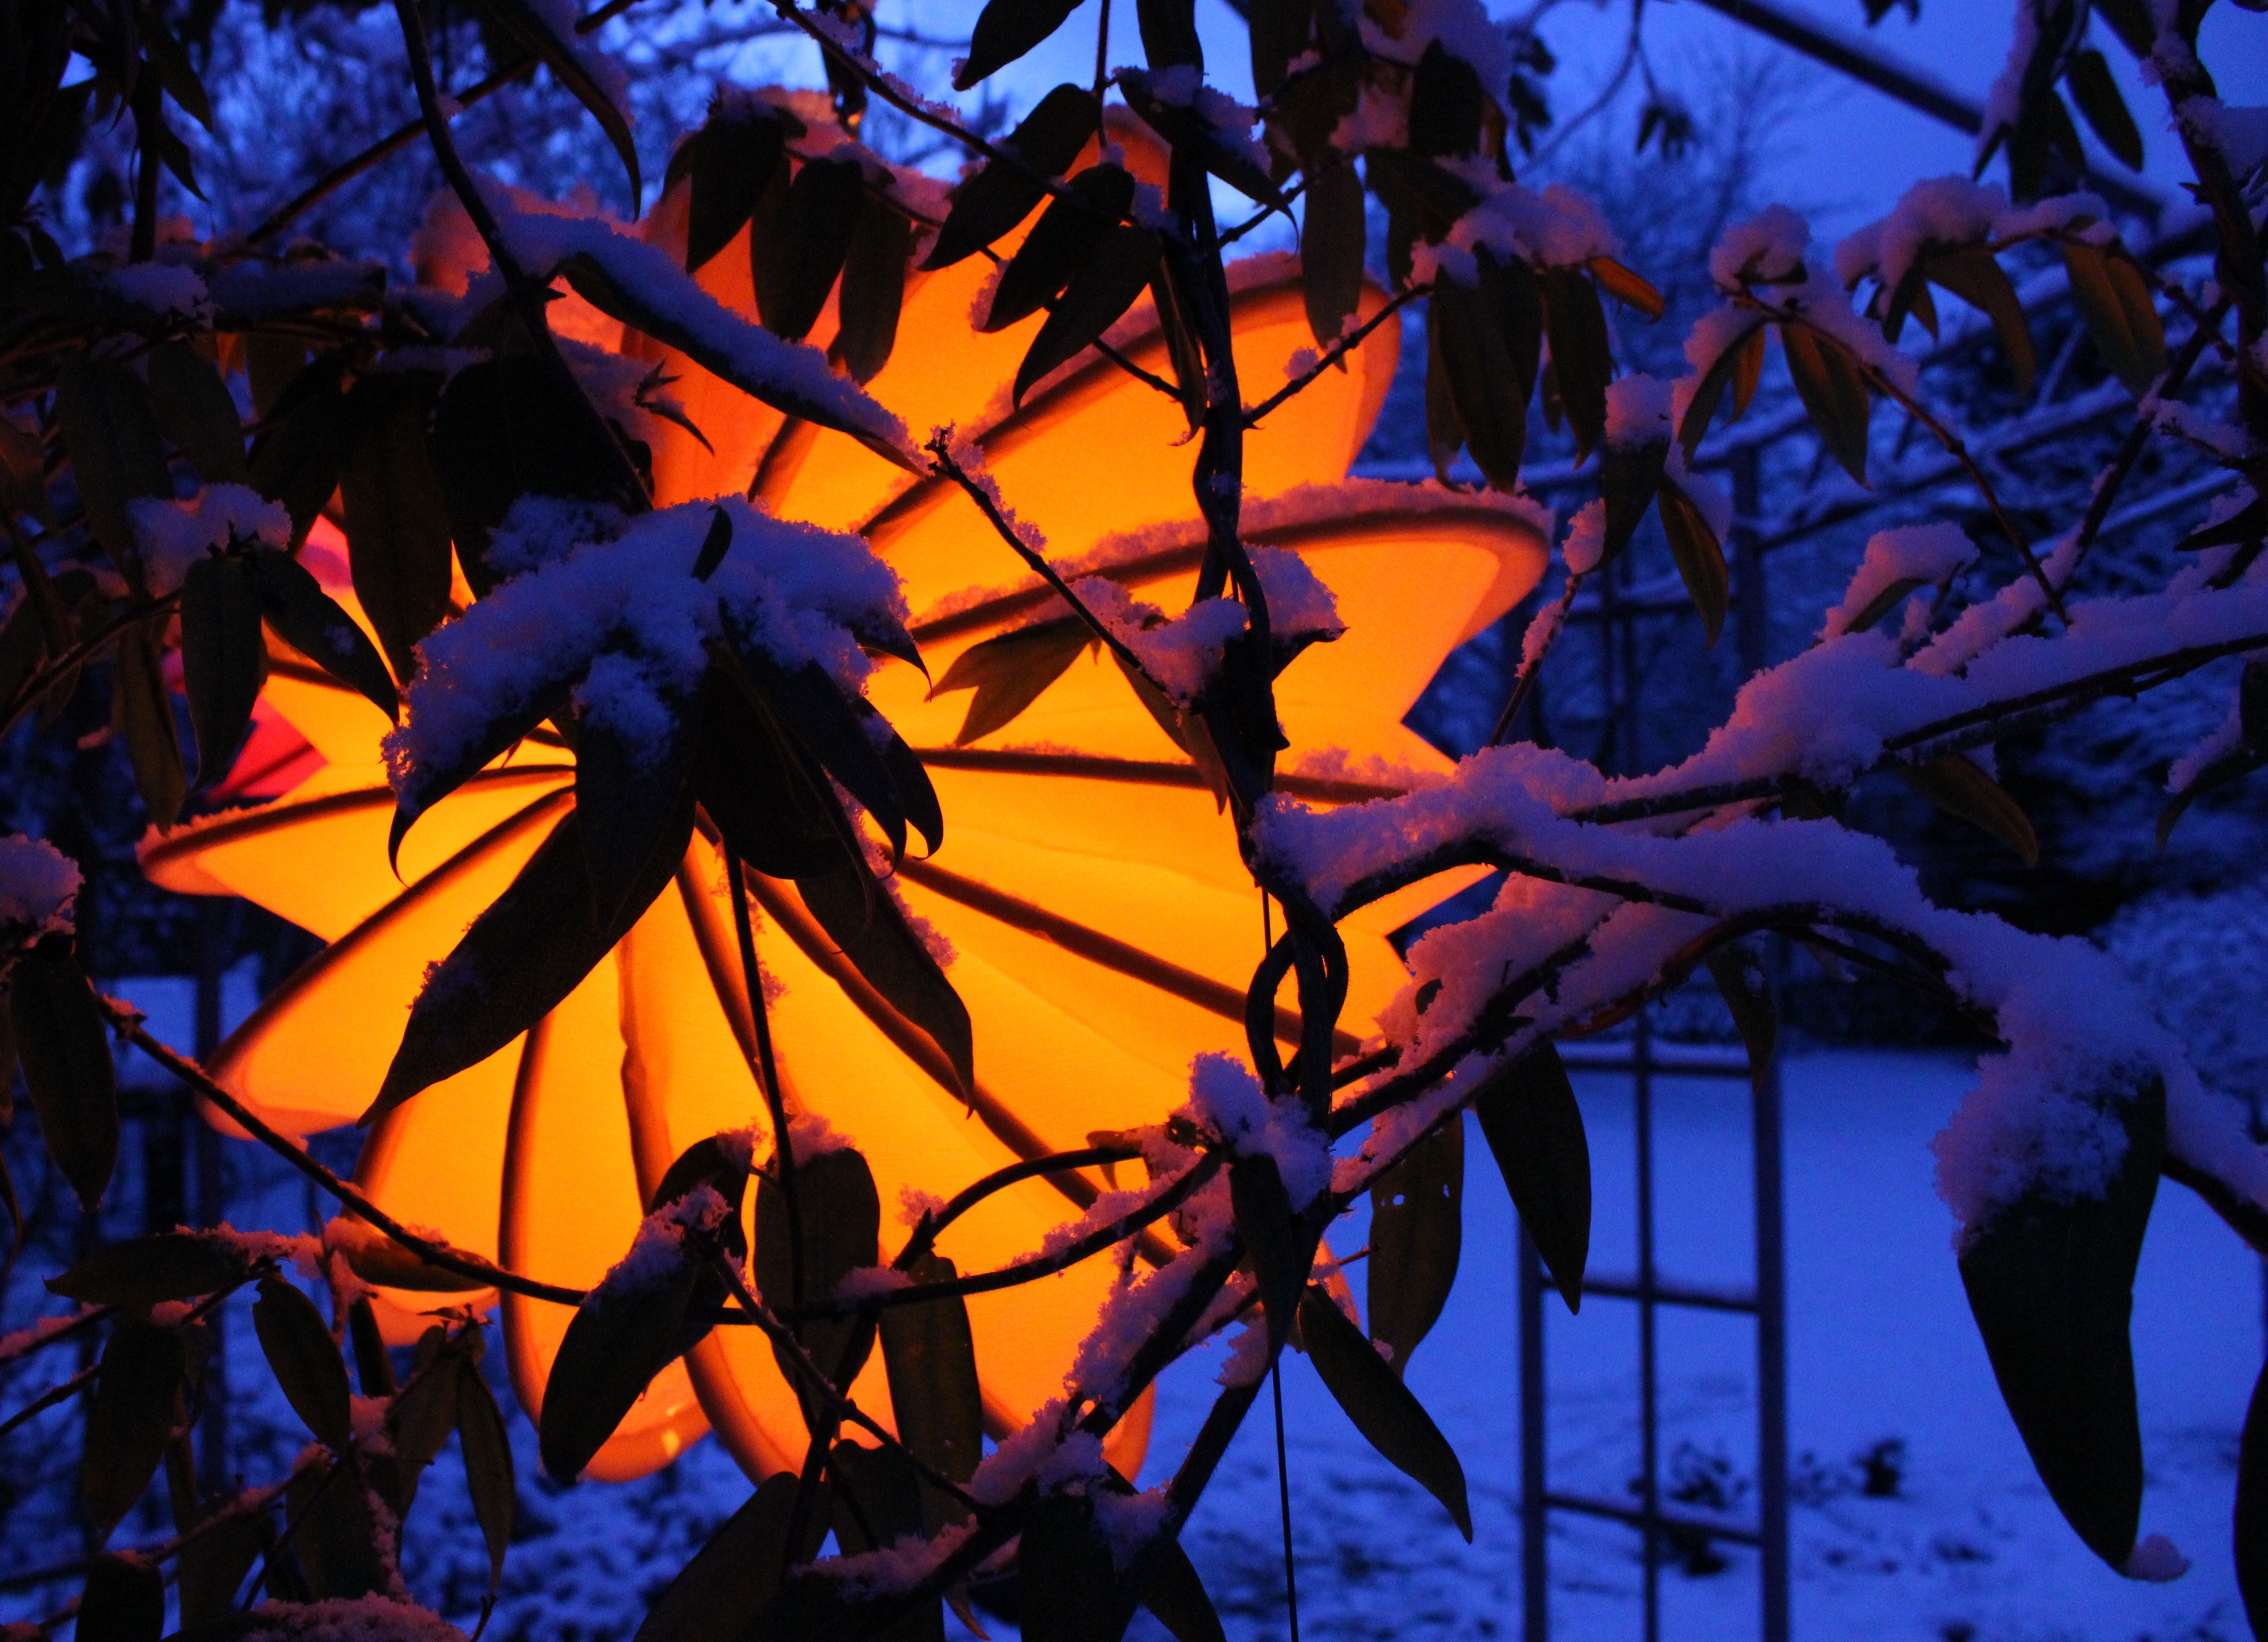 lamp behind snow covered leaves during nighttime